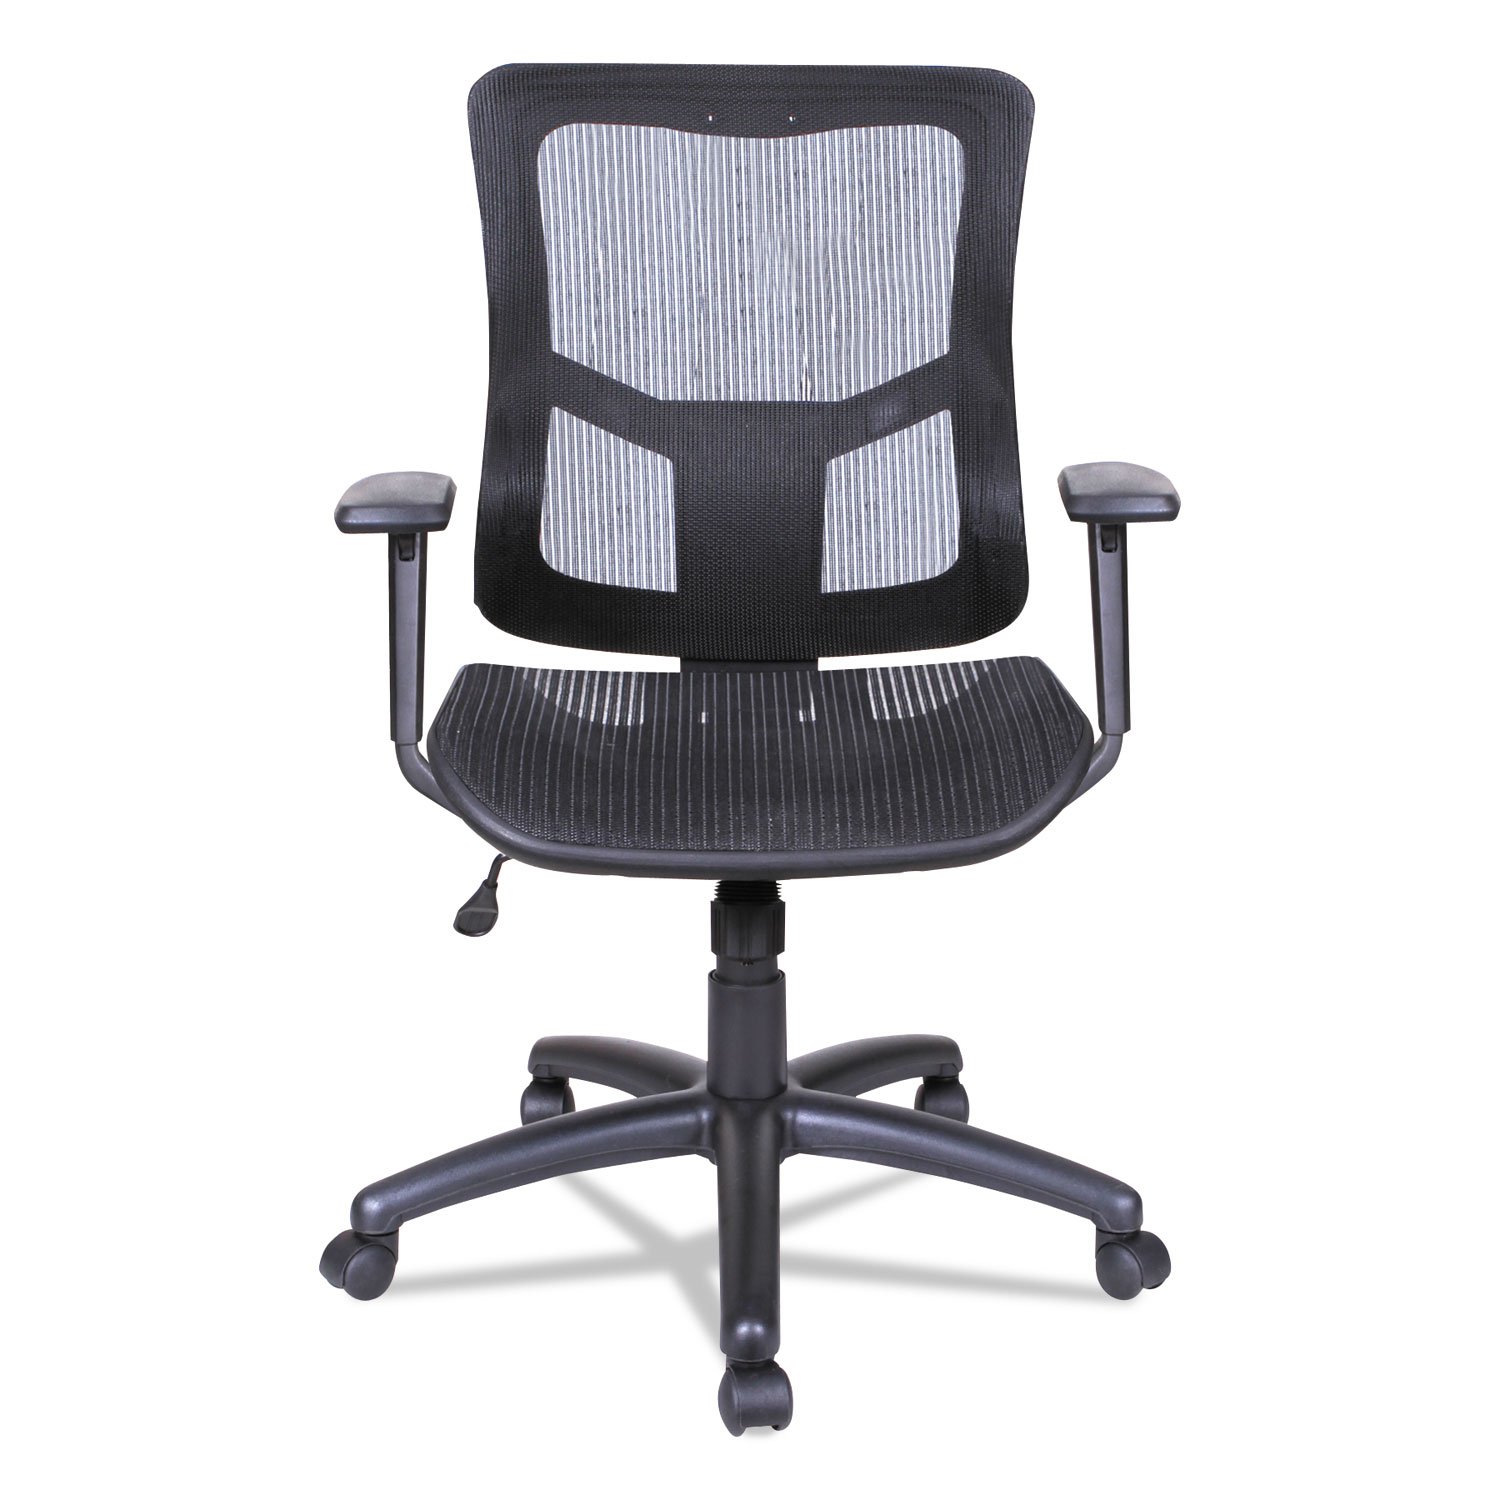 Elusion II Series Suspension Mesh Mid-Back Synchro with Seat Slide Chair, Black